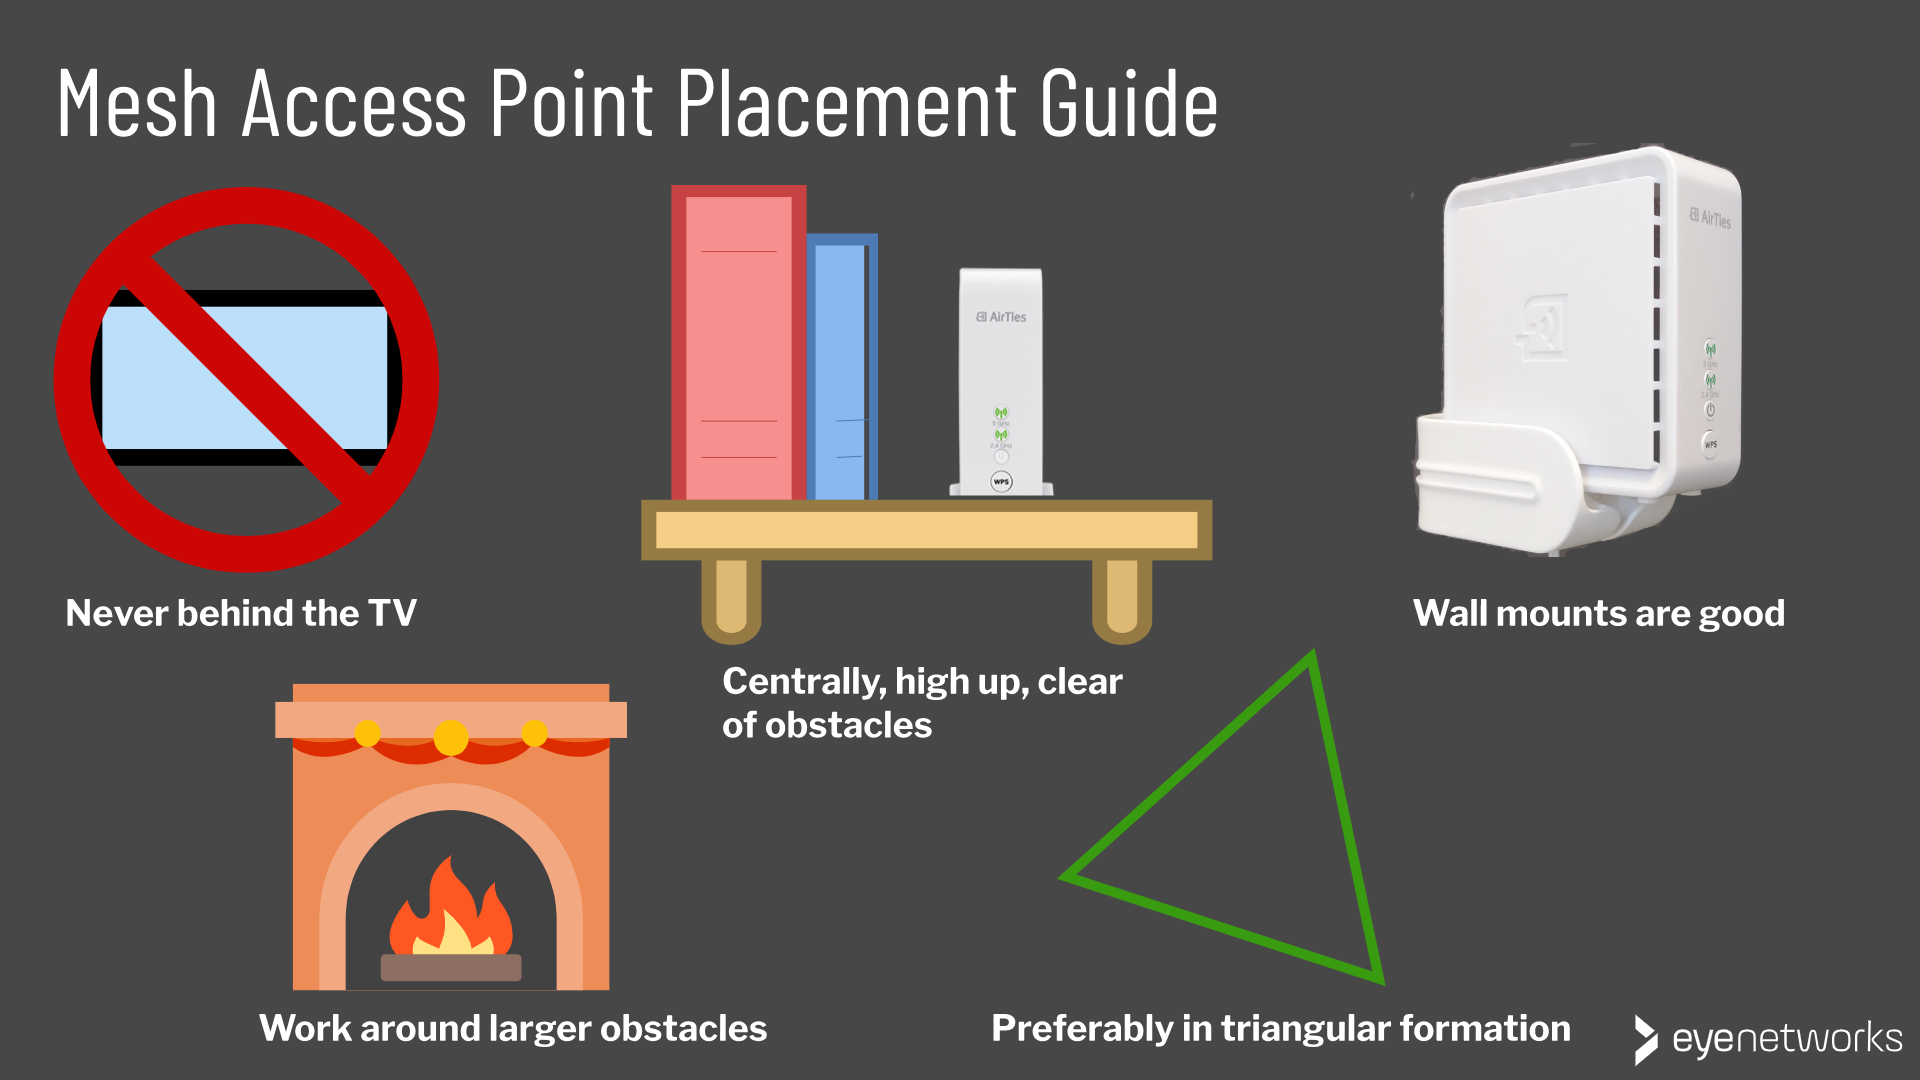 AirTies Access Point Placement Guide